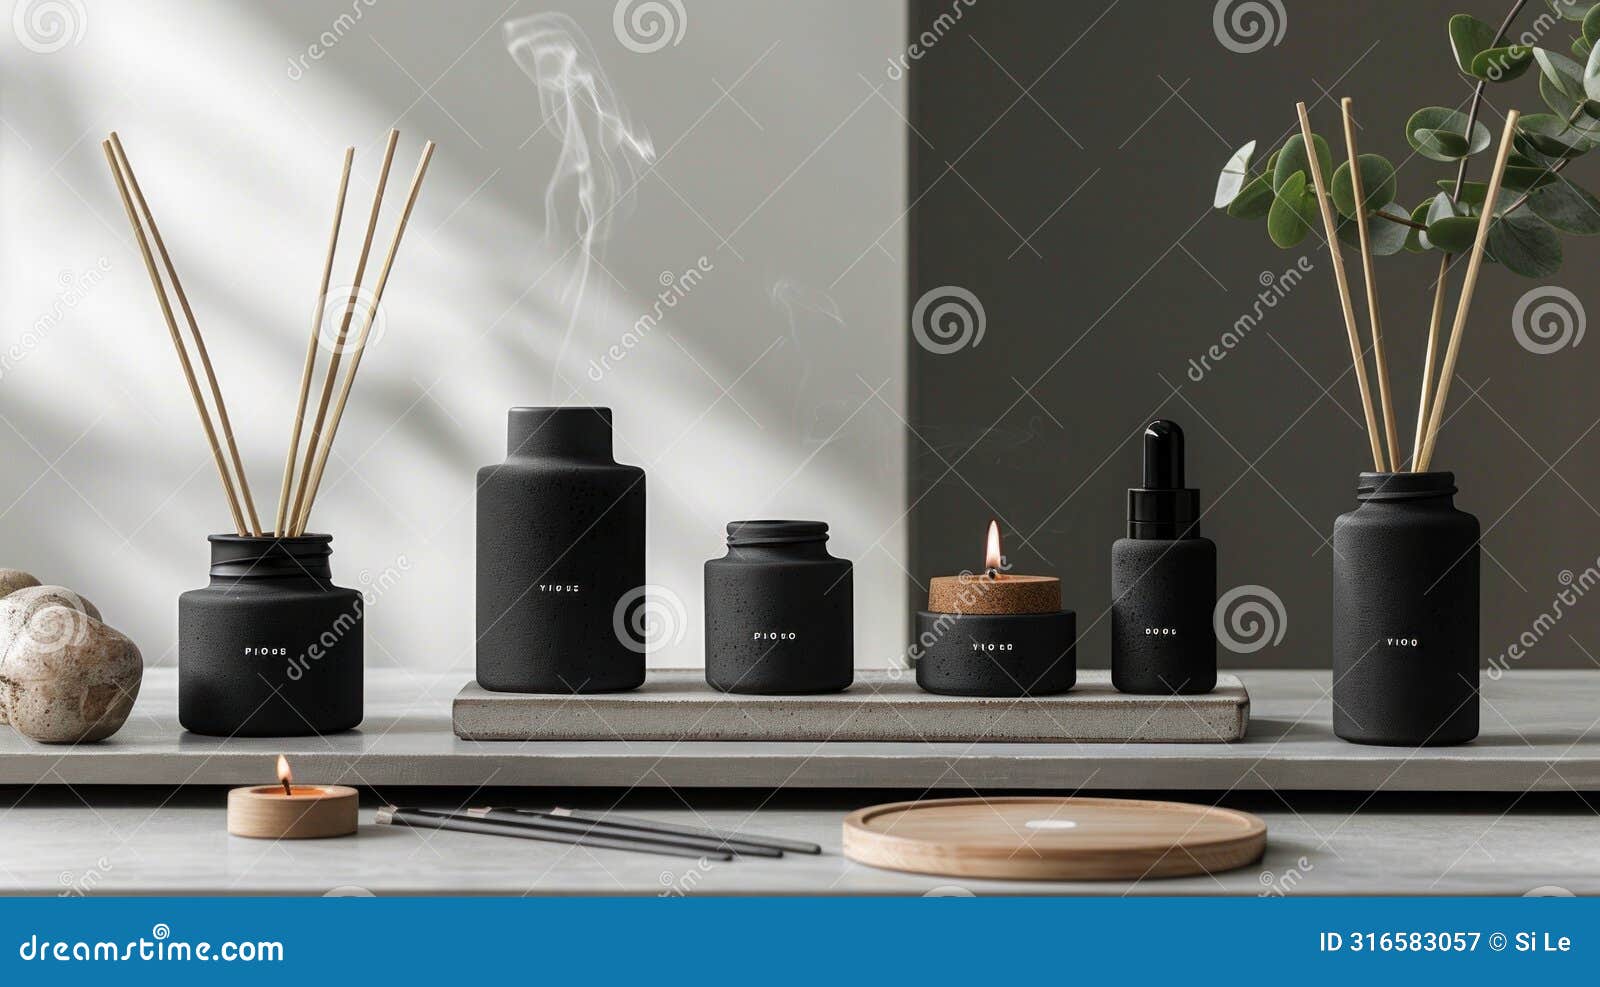 aesthetic collection of incense sticks and diffusers for branding mockup